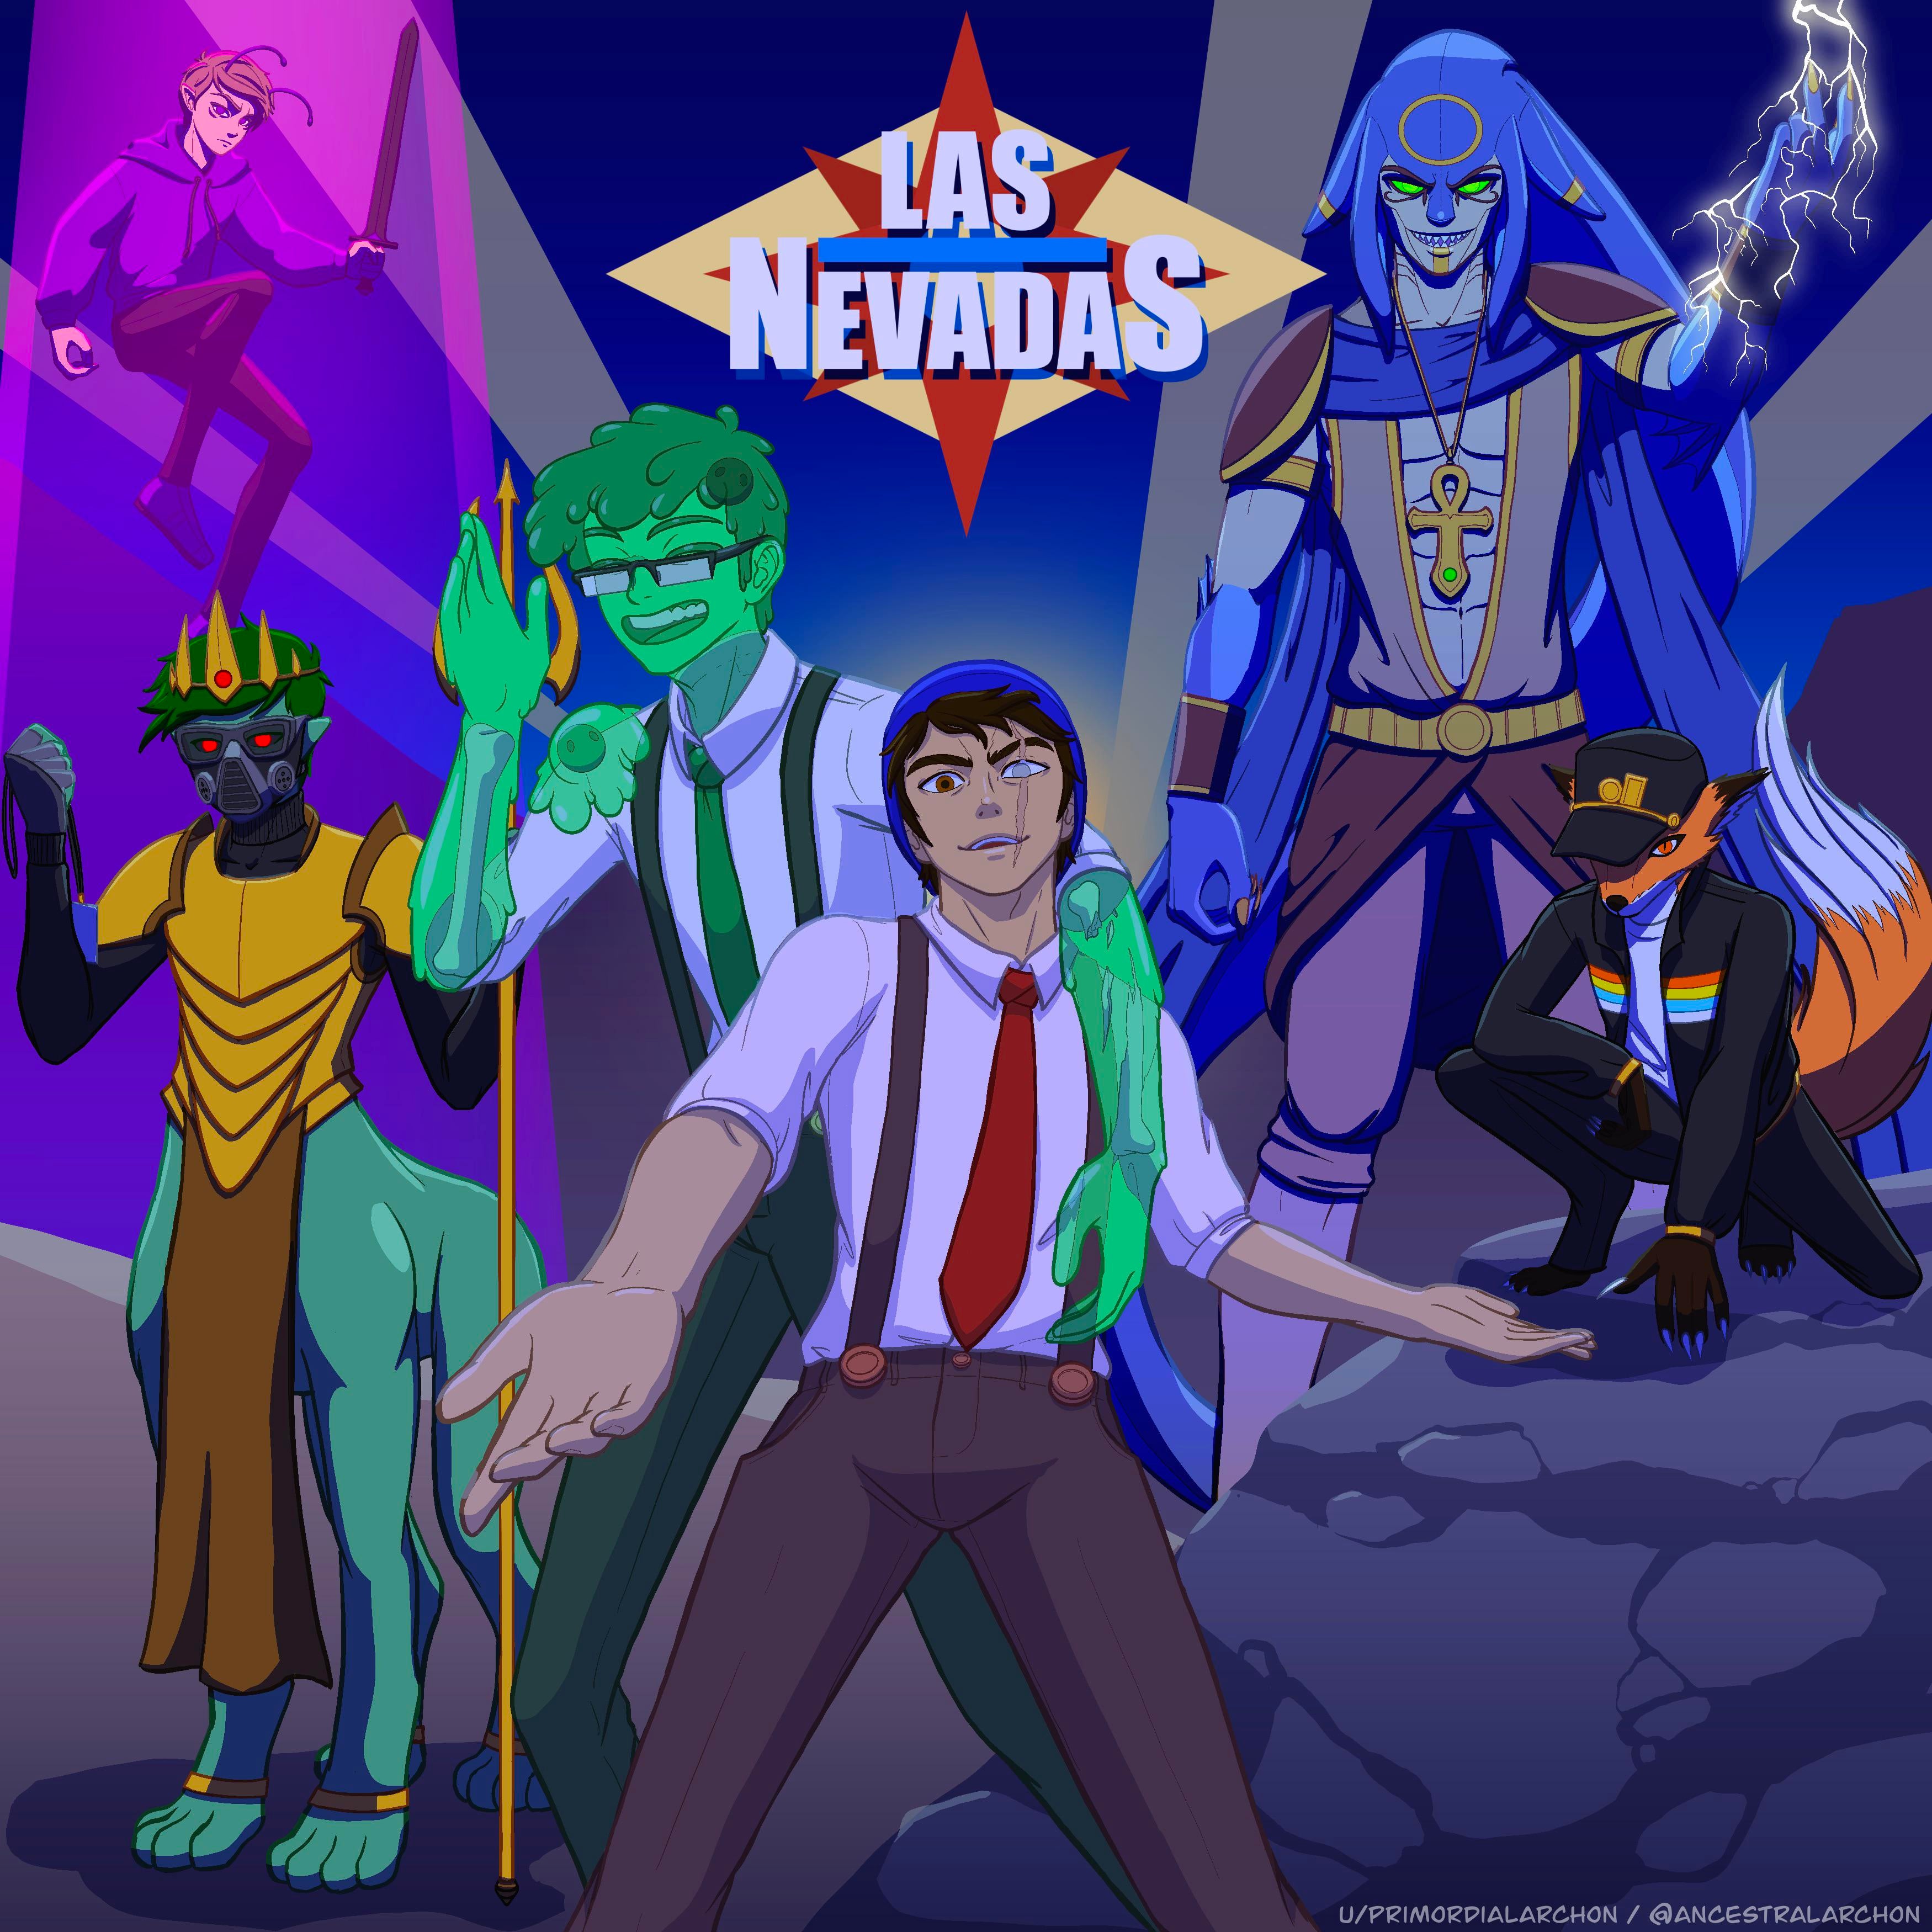 This is a drawing of the Las Nevadas crew. Quackity stands in the forefront of the picture wearing his Las Nevadas outfit. He's extending his arms out like he's welcoming the audience. His stance is vaguely threatening. Slime towers behind Quackity, wearing his Las Nevadas outfit. He is smiling and waving while also leaning on Quackity. To the left of Slime and Quackity is Sam, adorned in gold armor and drawn like a centaur. A gas mask covers Sam's entire face making it difficult to tell what he's feeling. Above Sam is Purpled, dressed in a simple purple hoodie and black pants. He has purple attenae and is holding his sword up as he jumps down to join the rest. He looks angry. He is in a purple beam of light, presumably from his UFO. To the right of Quackity and Slime are Fundy and Foolish. Fundy is crouched on a rock with his right hand down to stablize himself. He is dressed in his normal minecraft skin outfit, and his head is tilted downward so that we can't see his face. Foolish stands behind Fundy, smiling and showing off how powerful he is. He is the tallest one in the picture, barely fitting all of himself in frame. He's wearing the same outfit as his skin. His right arm is raised conducting electricity. In the top center of the picture is the Las Nevadas logo which looks very similar to the Las Vegas city logo, a yellow diamond with white text and a red star for an accent. There are beams of light in the background like one would see for advertisements. Behind all of this, the rest of the background is a dark blue color.